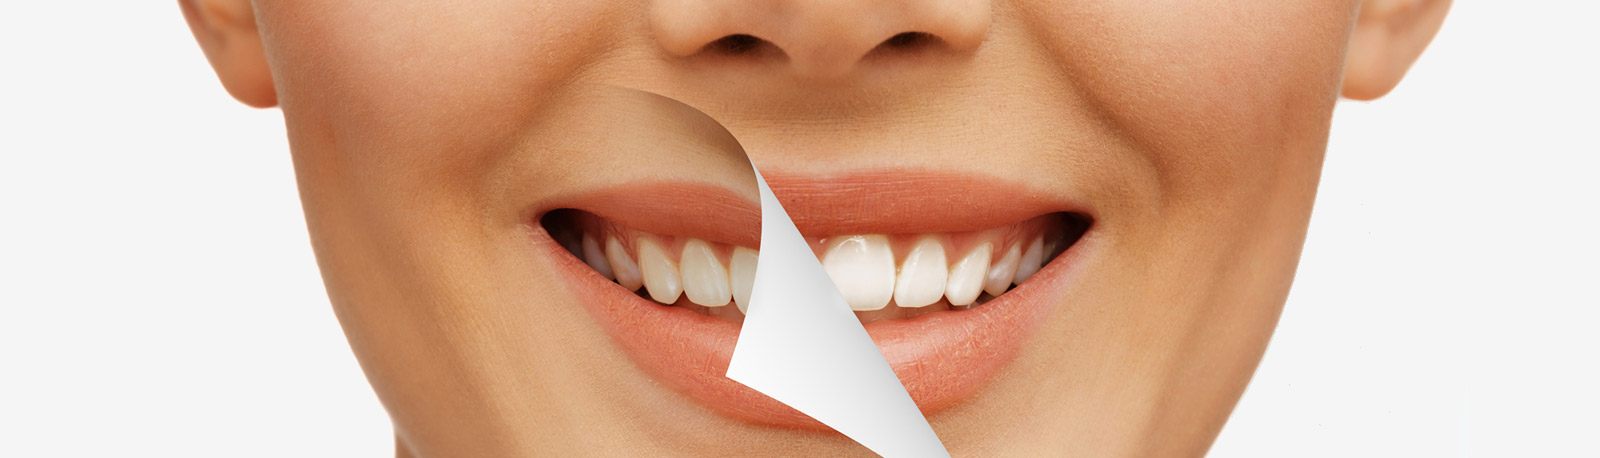 Stained Teeth Treatment in Dunedin FL - Whitening Solutions